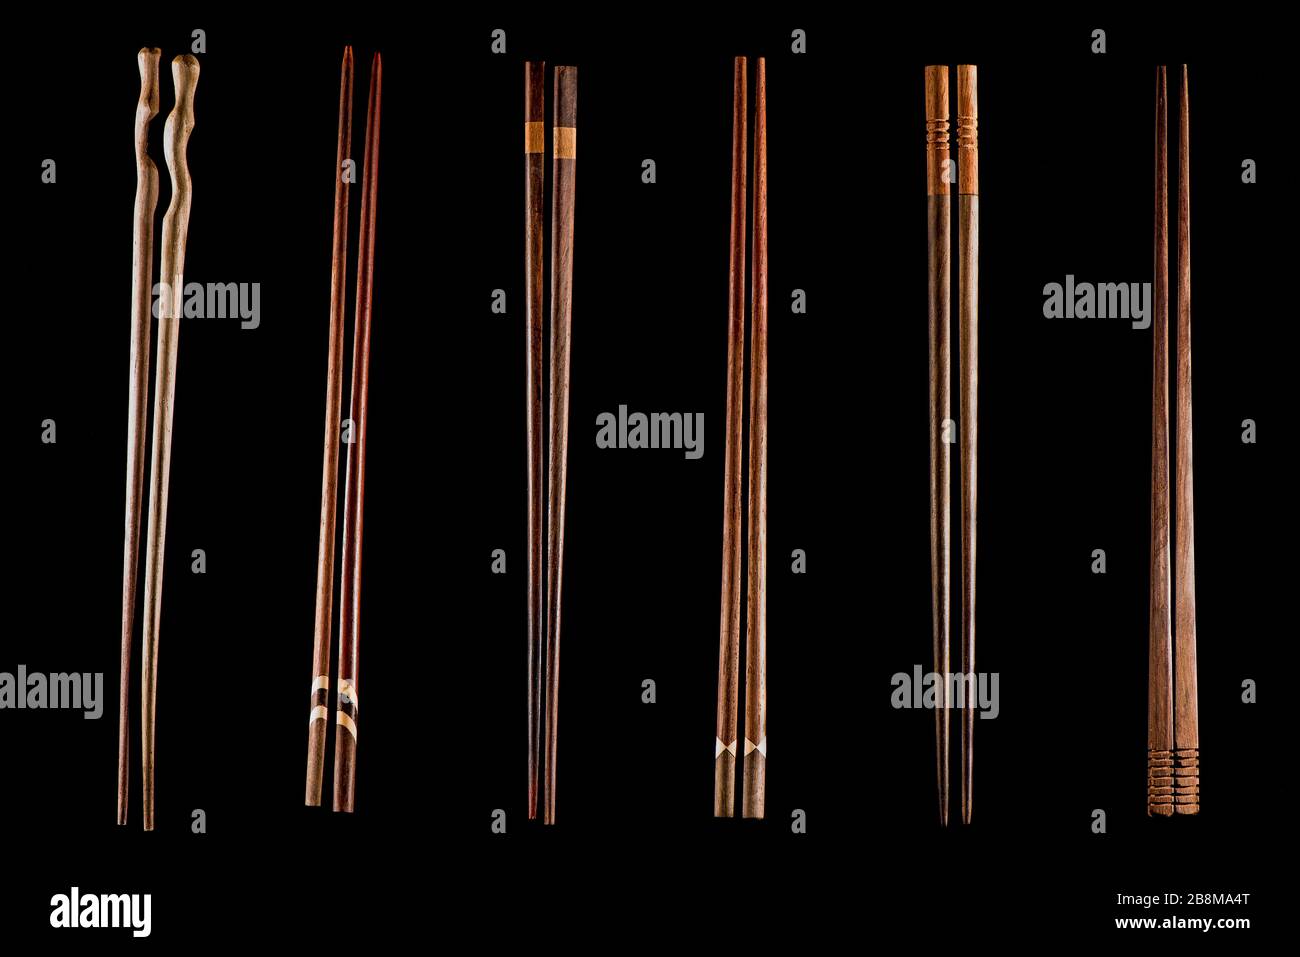 Different wooden Chopsticks against a black background. Asian eating utensils. Bar code appearance. Stock Photo